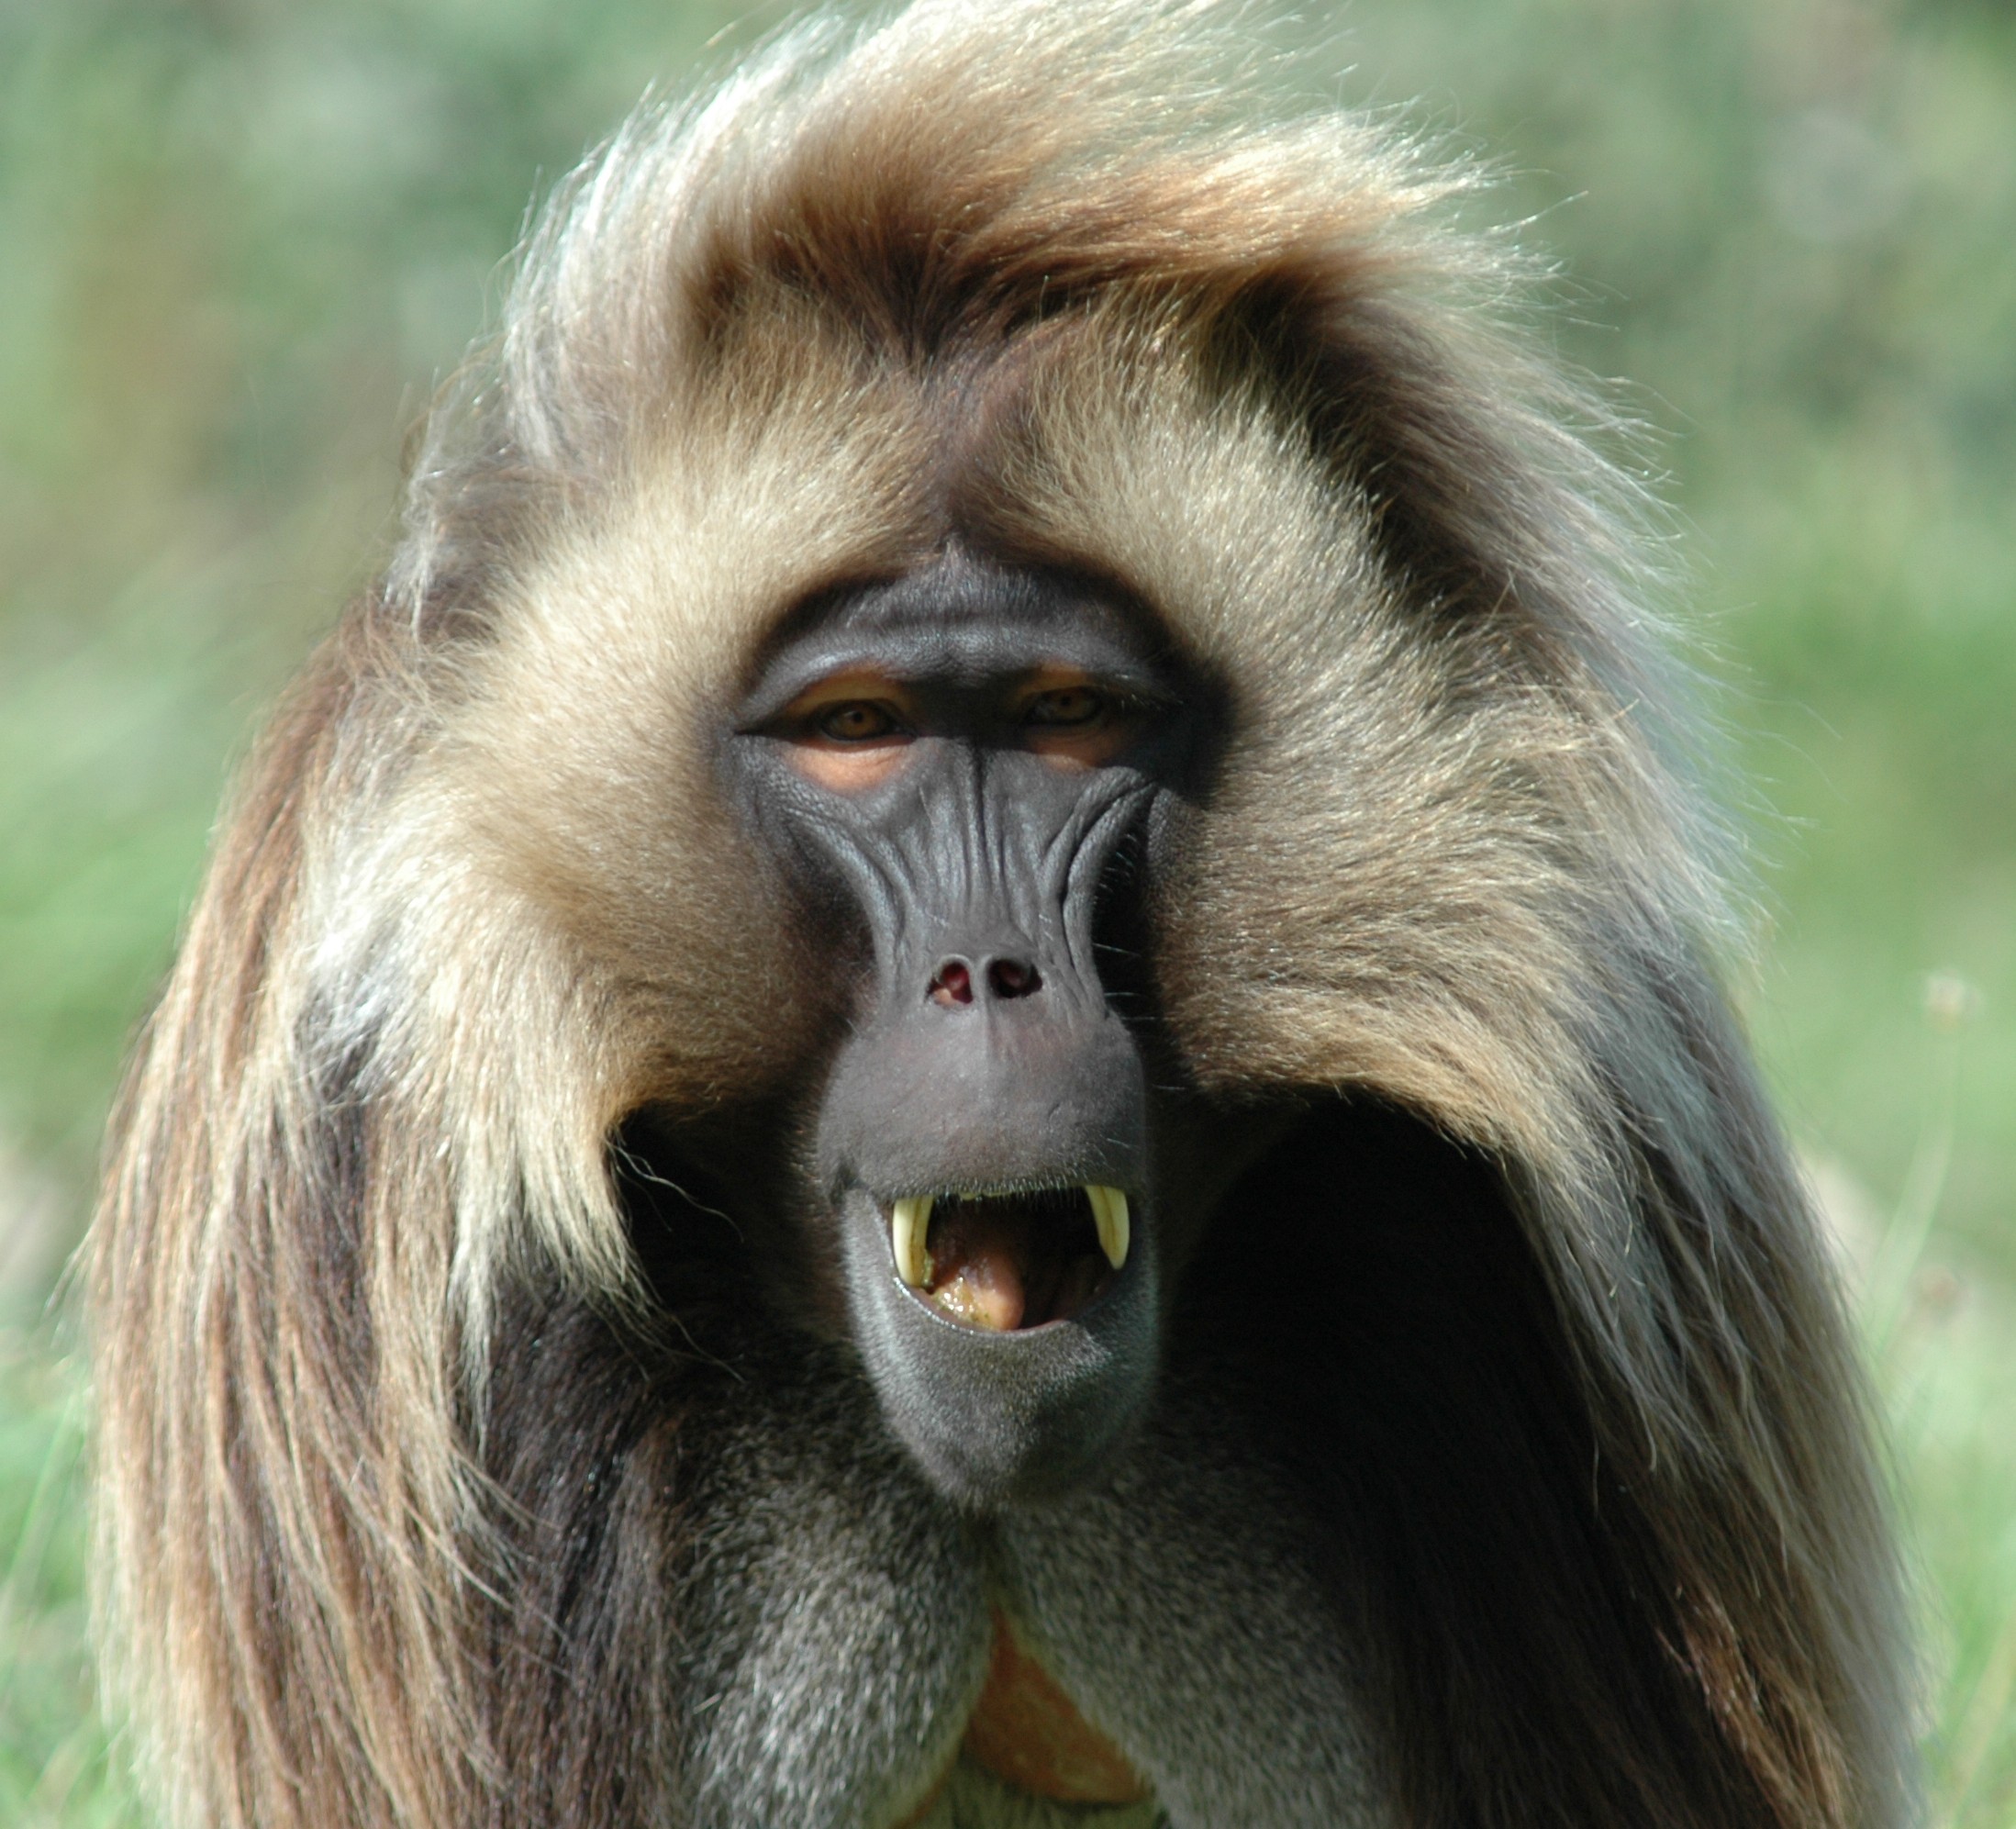 In Primates, the Appendix Is Found to Have a Protective Effect Against Infectious Diarrhea